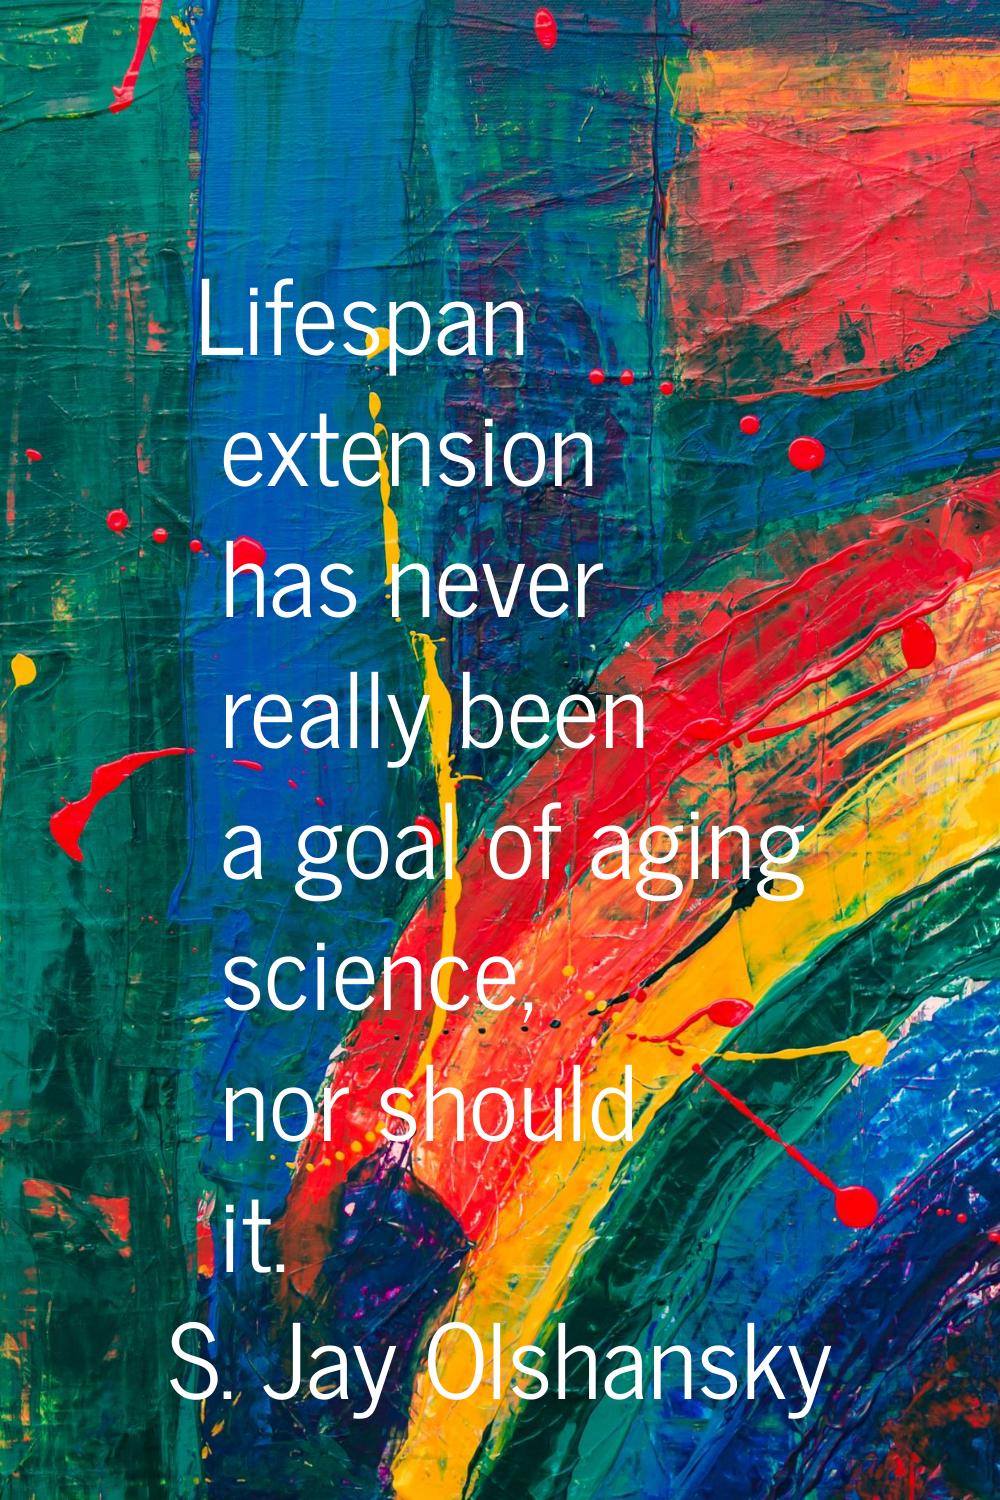 Lifespan extension has never really been a goal of aging science, nor should it.